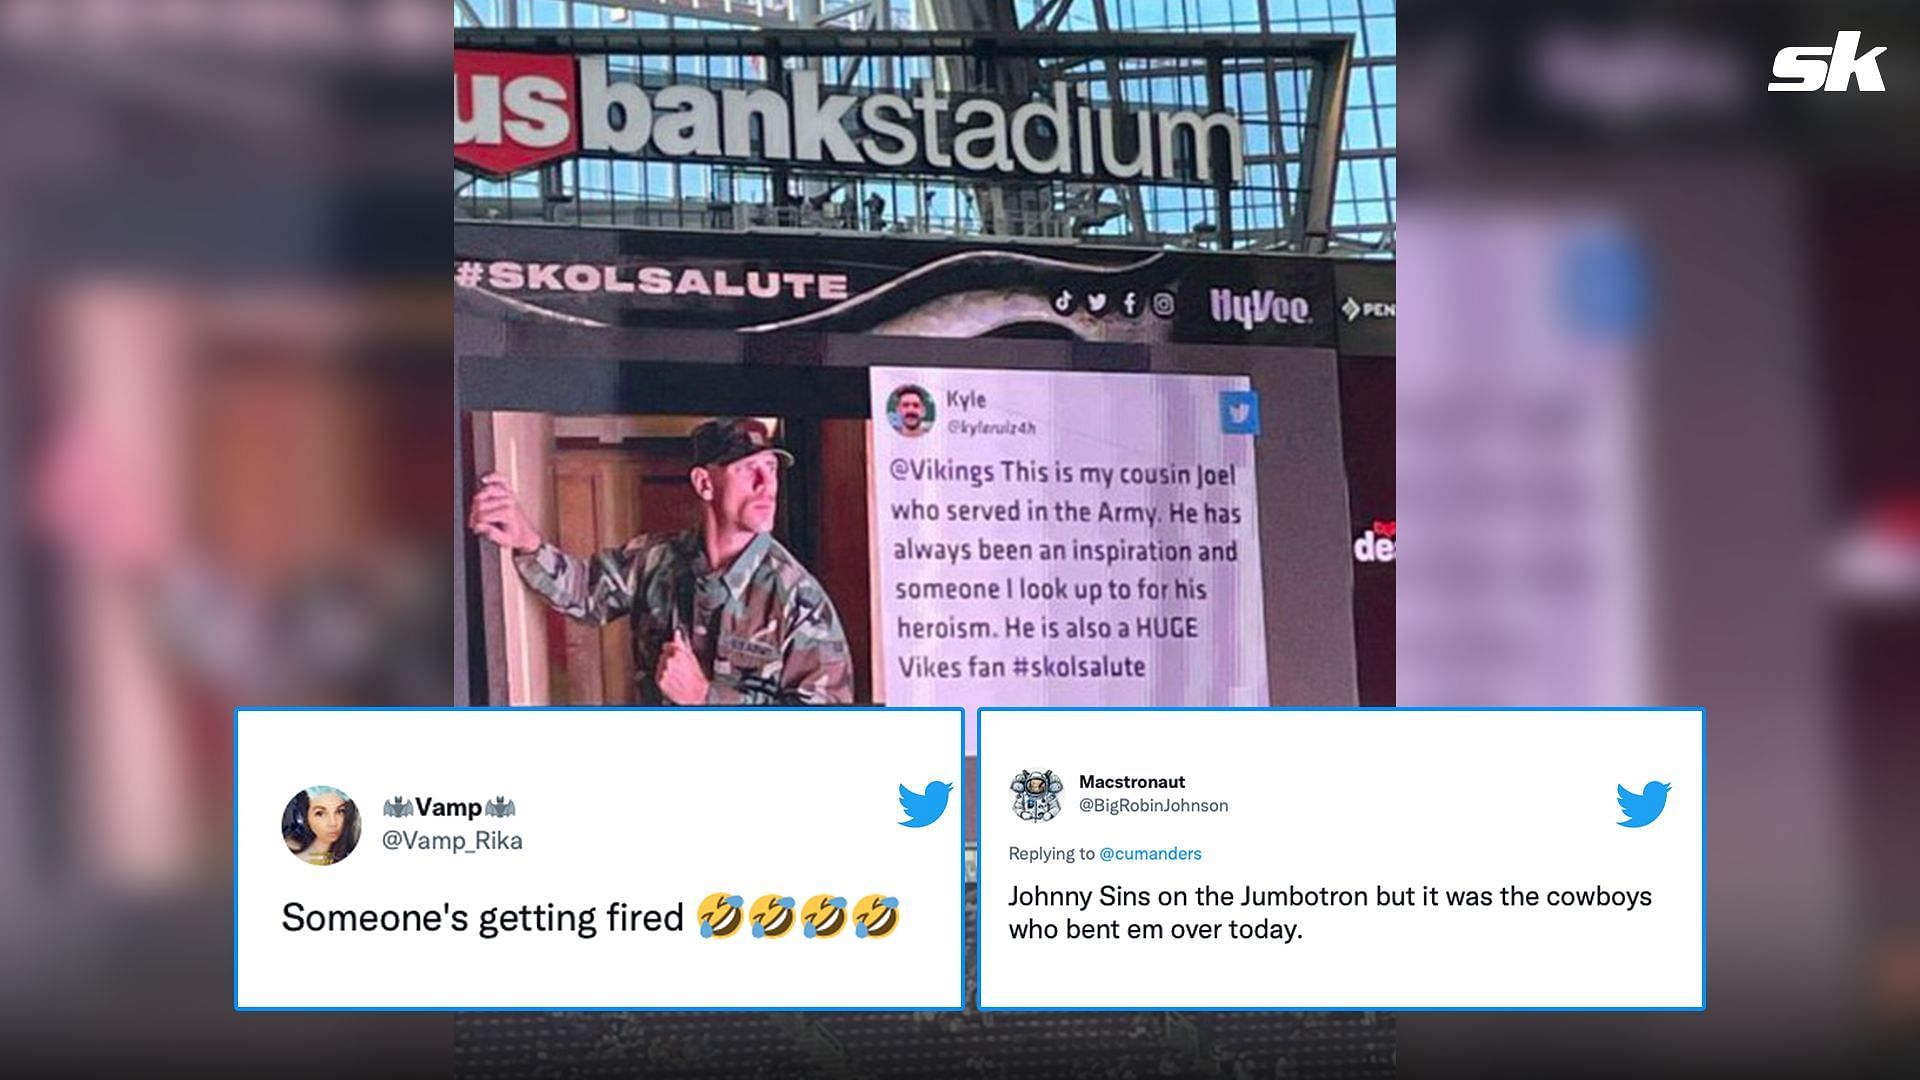 “someone’s Getting Fired” Nfl Fans Roast Vikings After Media Team Got Baited Into Displaying